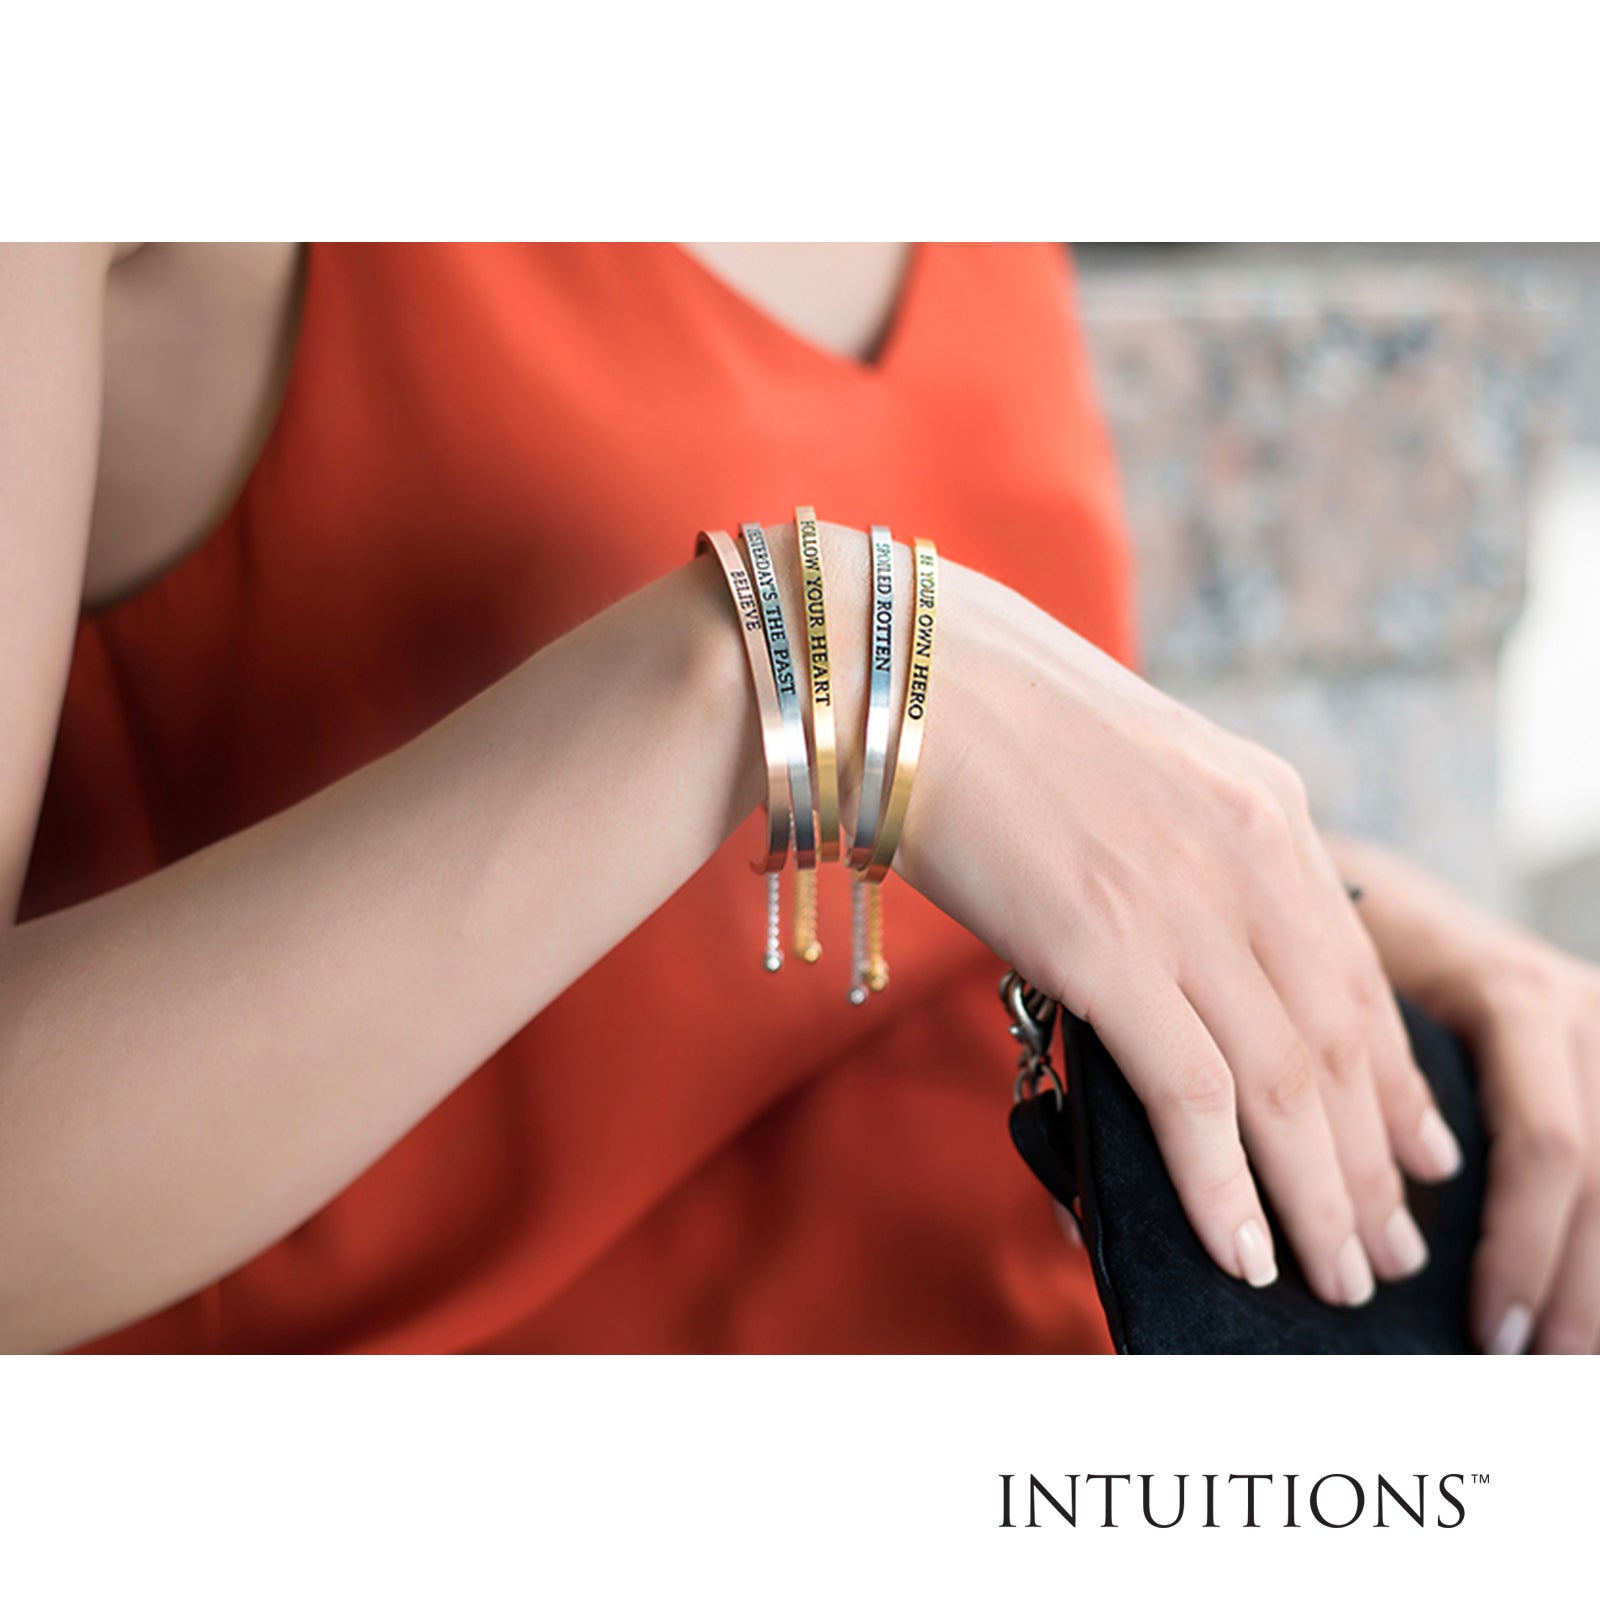 Intuitions Stainless Steel THERE IS NO FRIEND LIKE A SISTER Diamond Accent Adjustable Bracelet fine designer jewelry for men and women